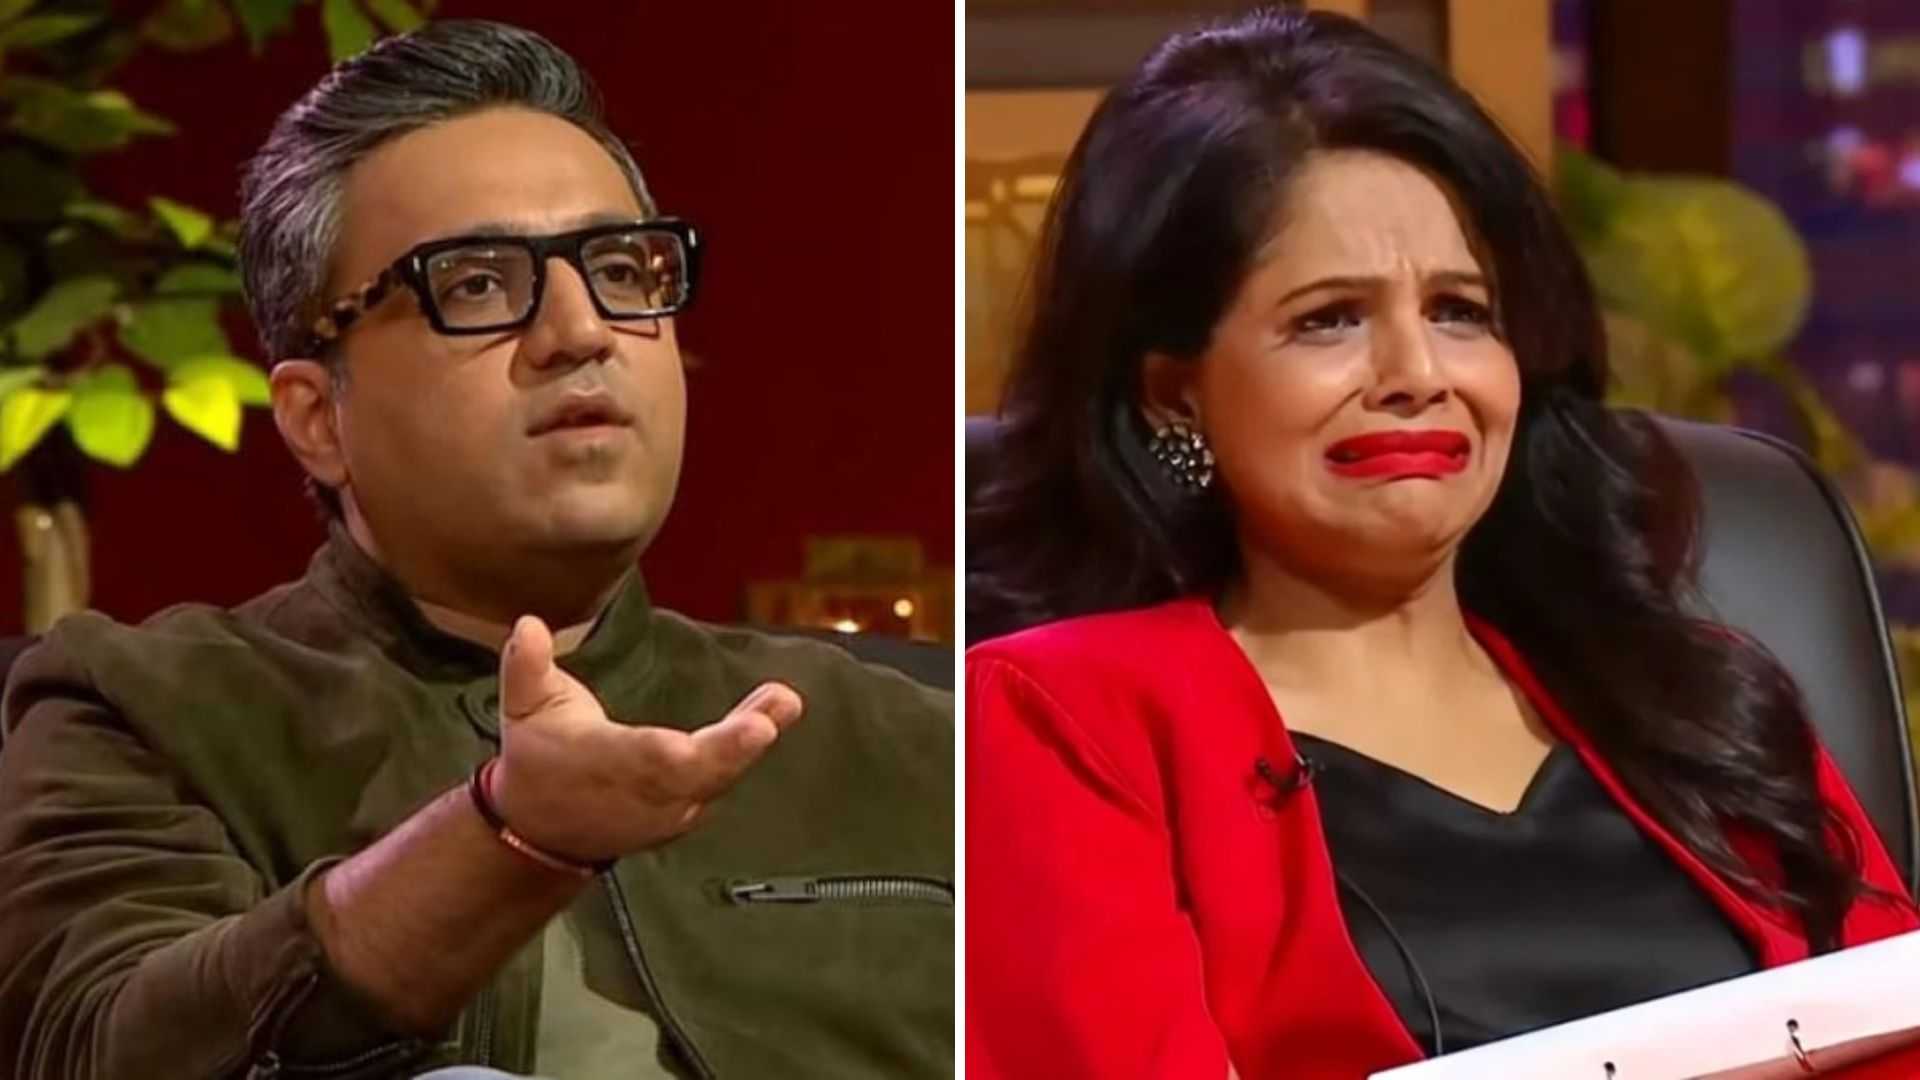 'Woh mere ko miss karti hai' : Ashneer Grover just had the most sassy comeback to Shark Tank India 2's Namita Thapar's toxic comment for him